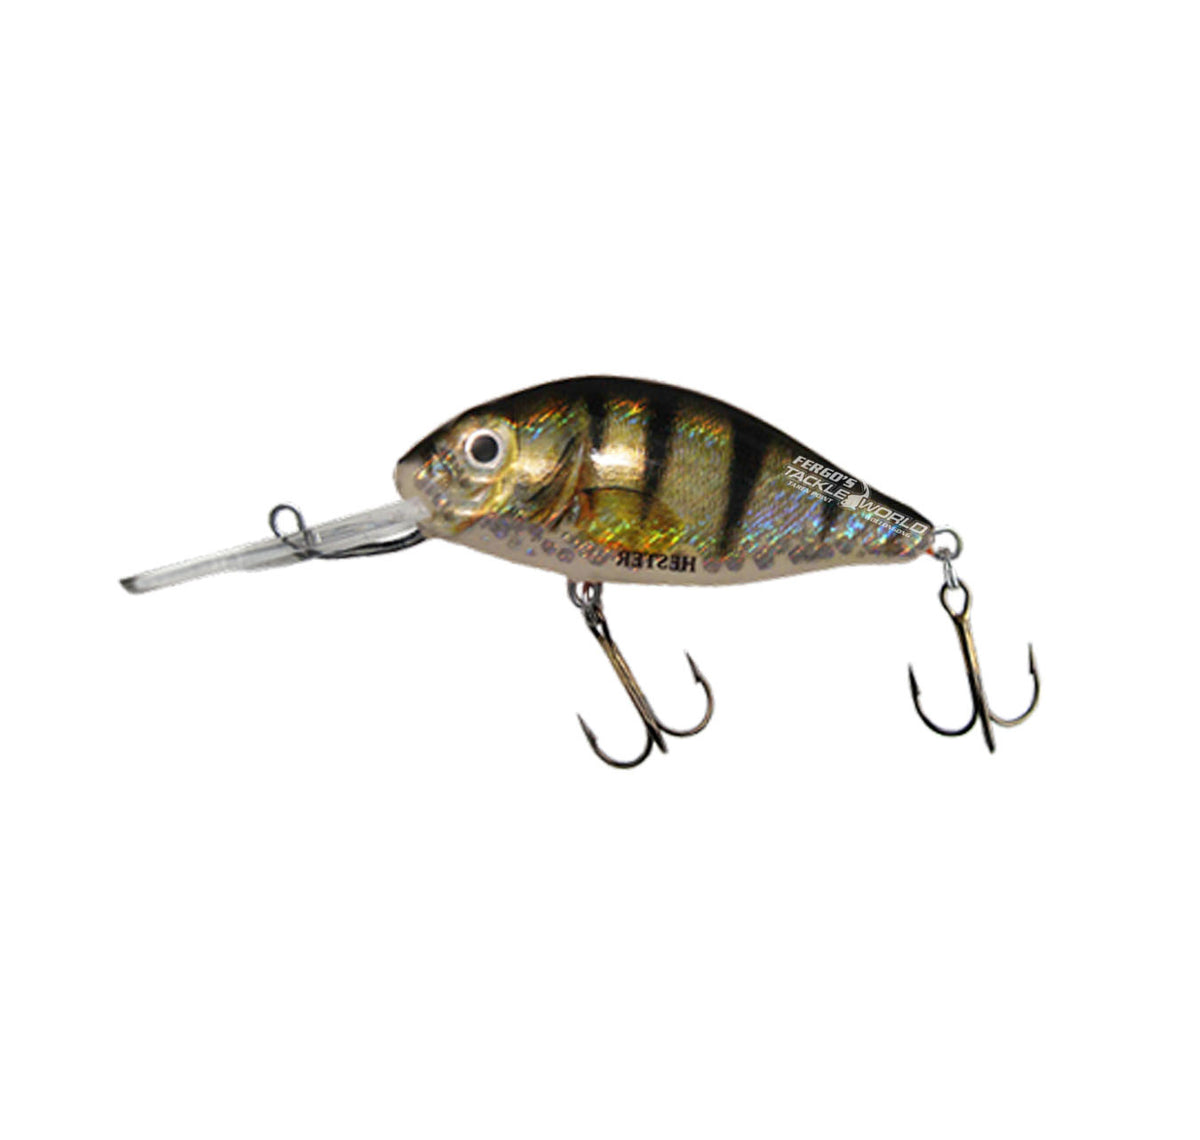 Hester Prussian Carp Lures